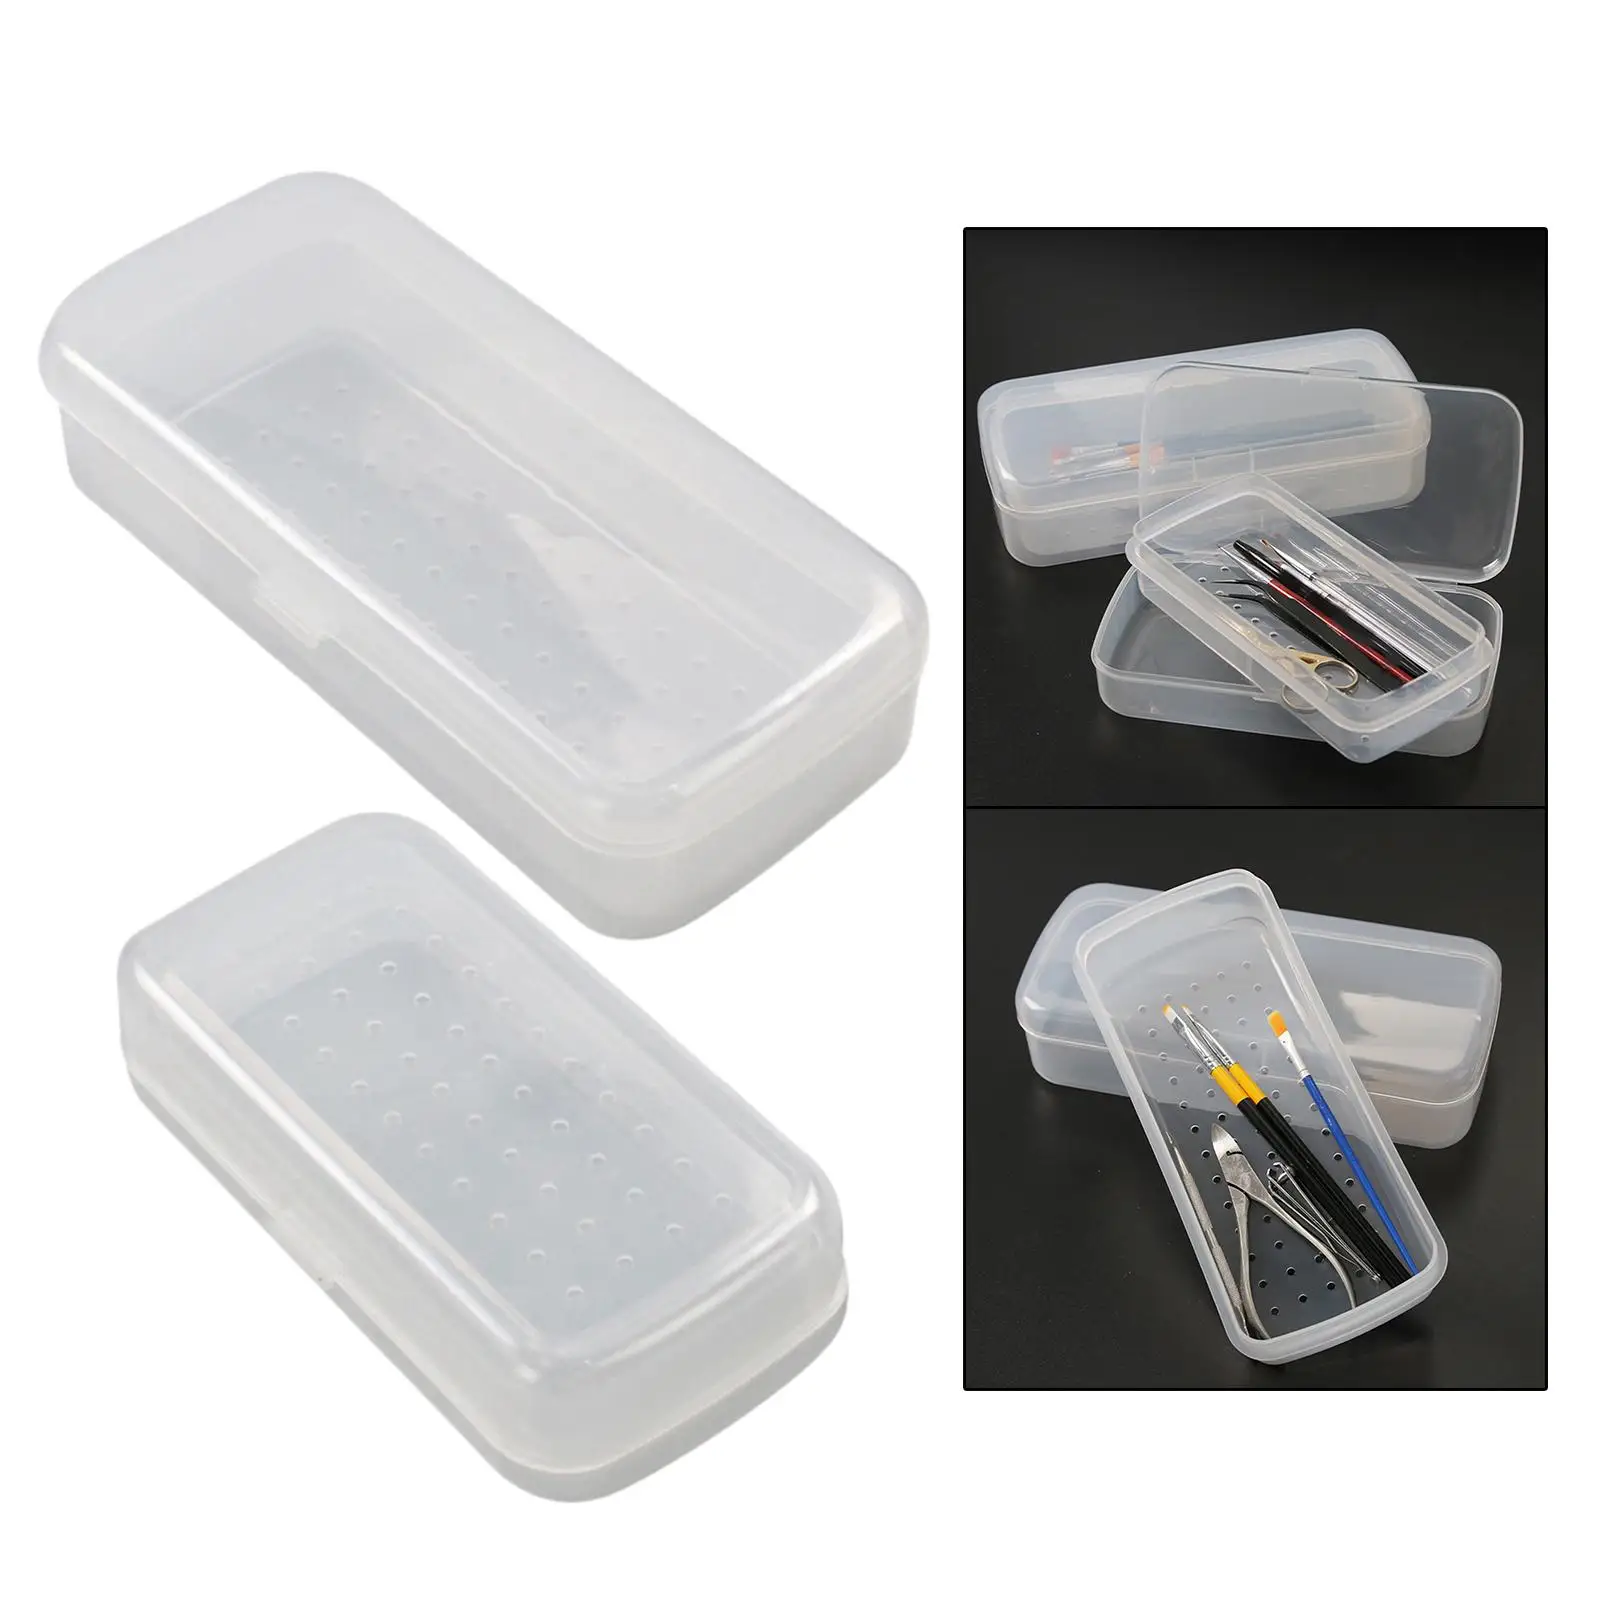 Transparent Plastic Sterilizing Tray for Nail,Tweezers ,Easy Visibility and Access Waterproof , Easy to Clean Durable Portable